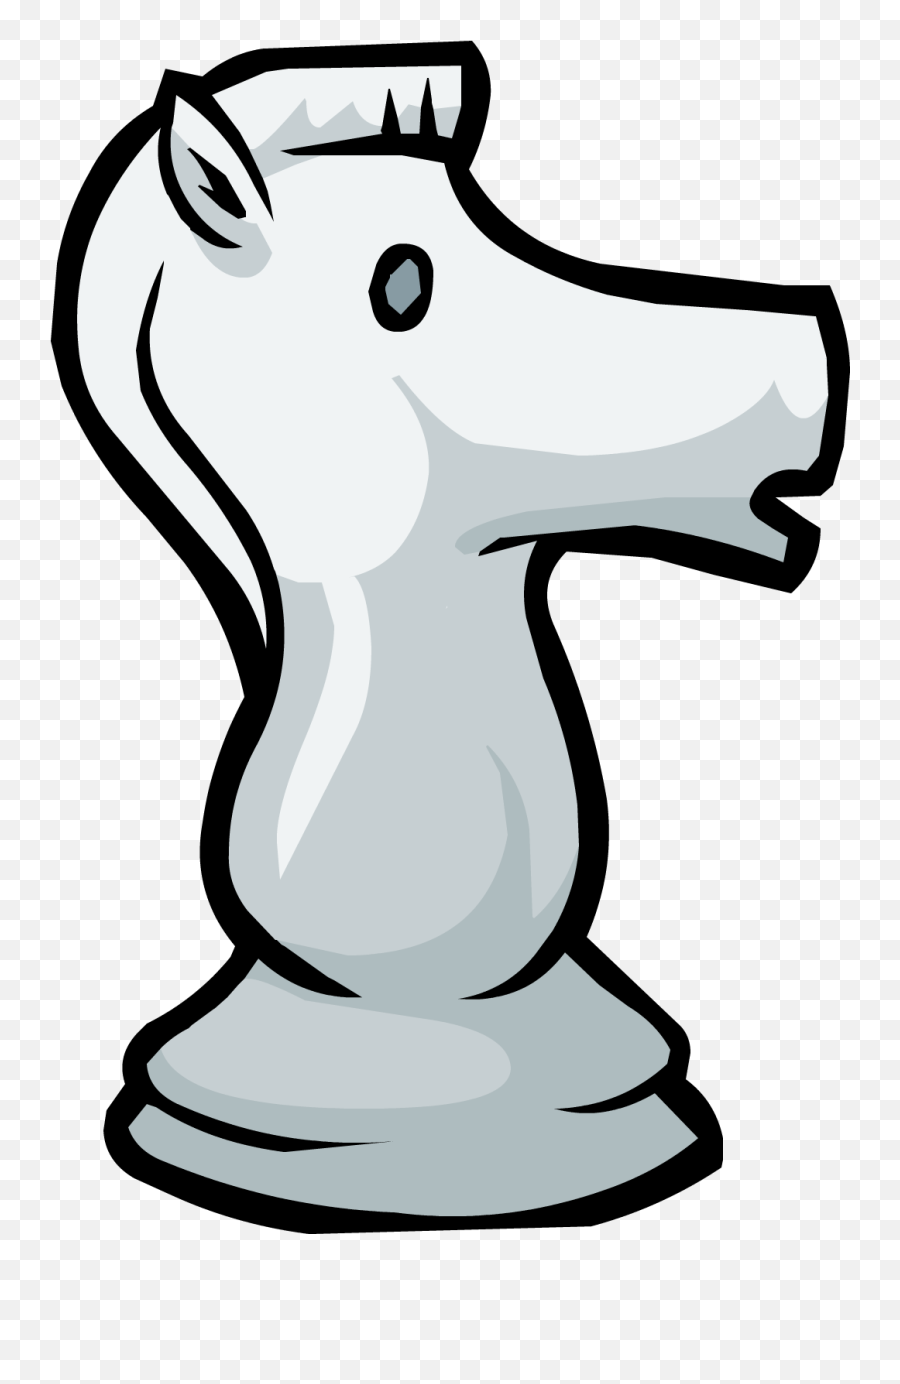 Horse Chess Piece Clipart Free Image - Club Penguin Chess Emoji,Chess Clipart